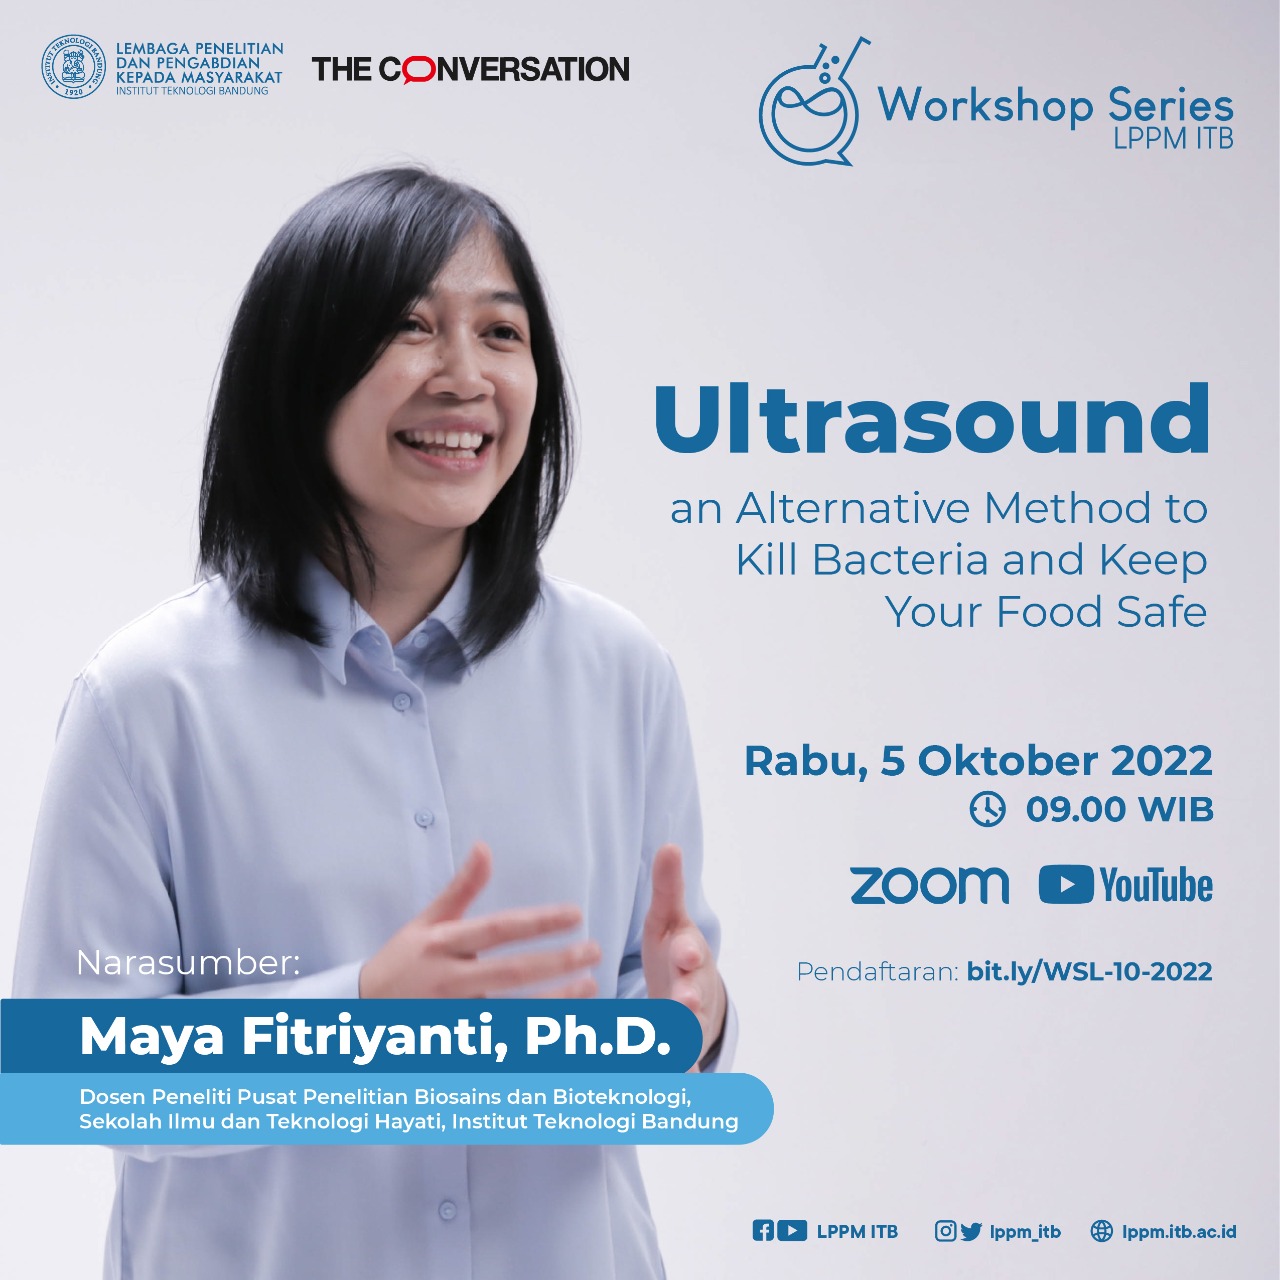 Ultrasound an Alternative Method to Kill Bacteria and Keep Your Food Safe